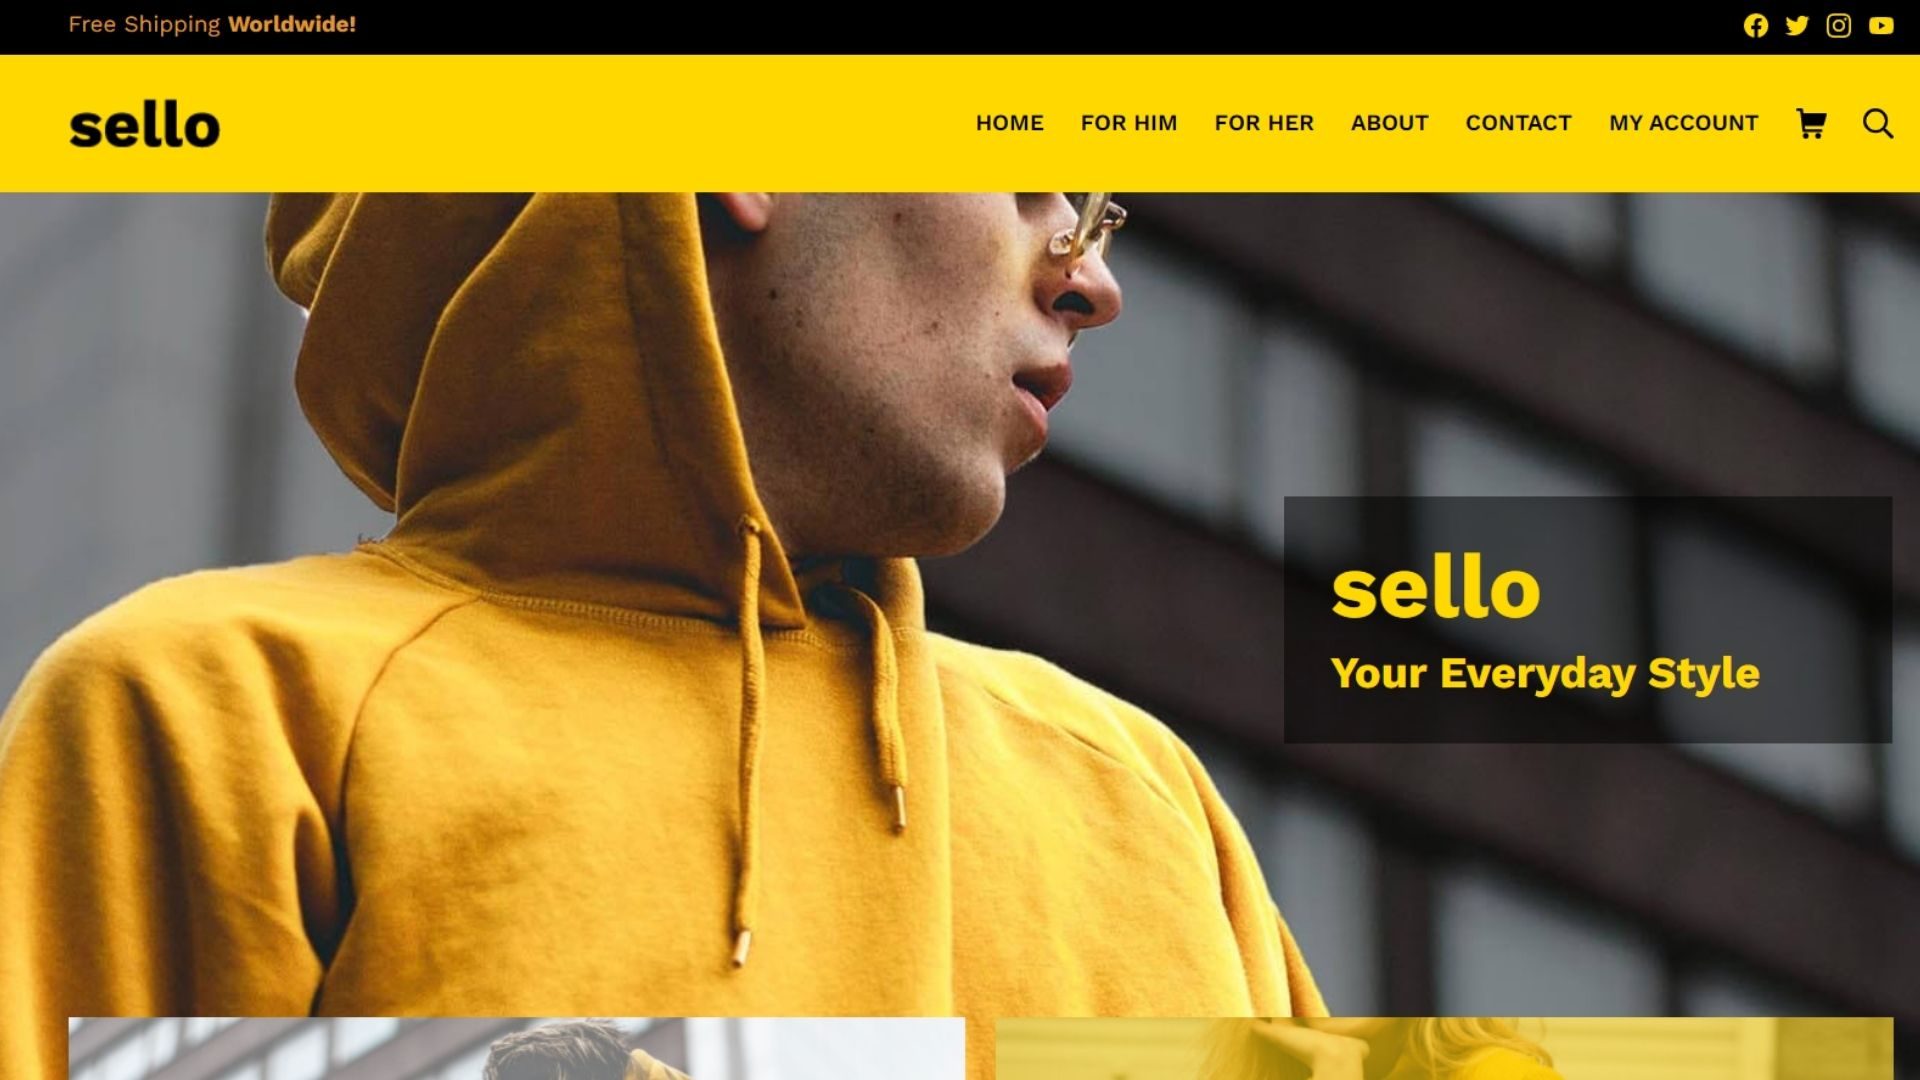 Sello Theme And Website Template Free Download By Daulat Hussain